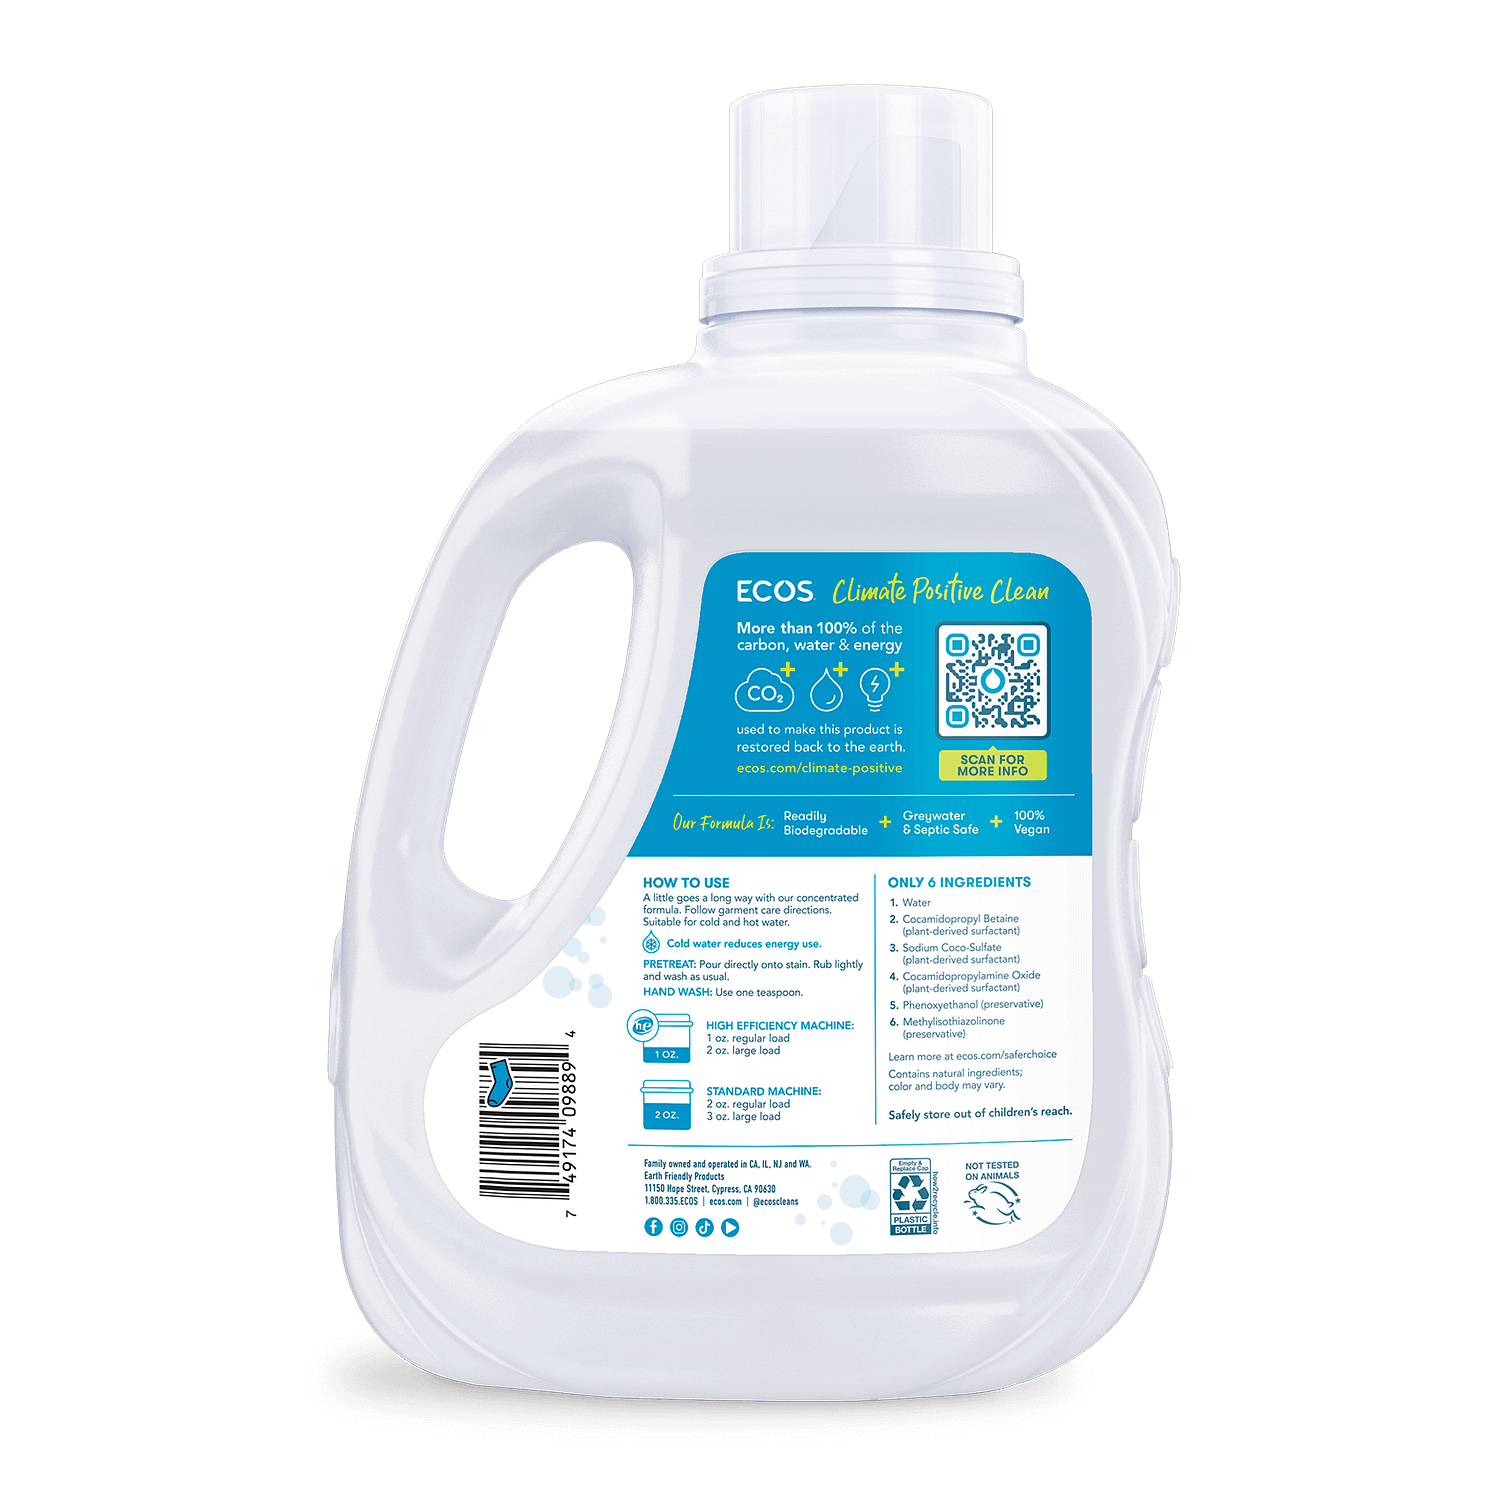 ECOS Laundry Detergent Free & Clear Back